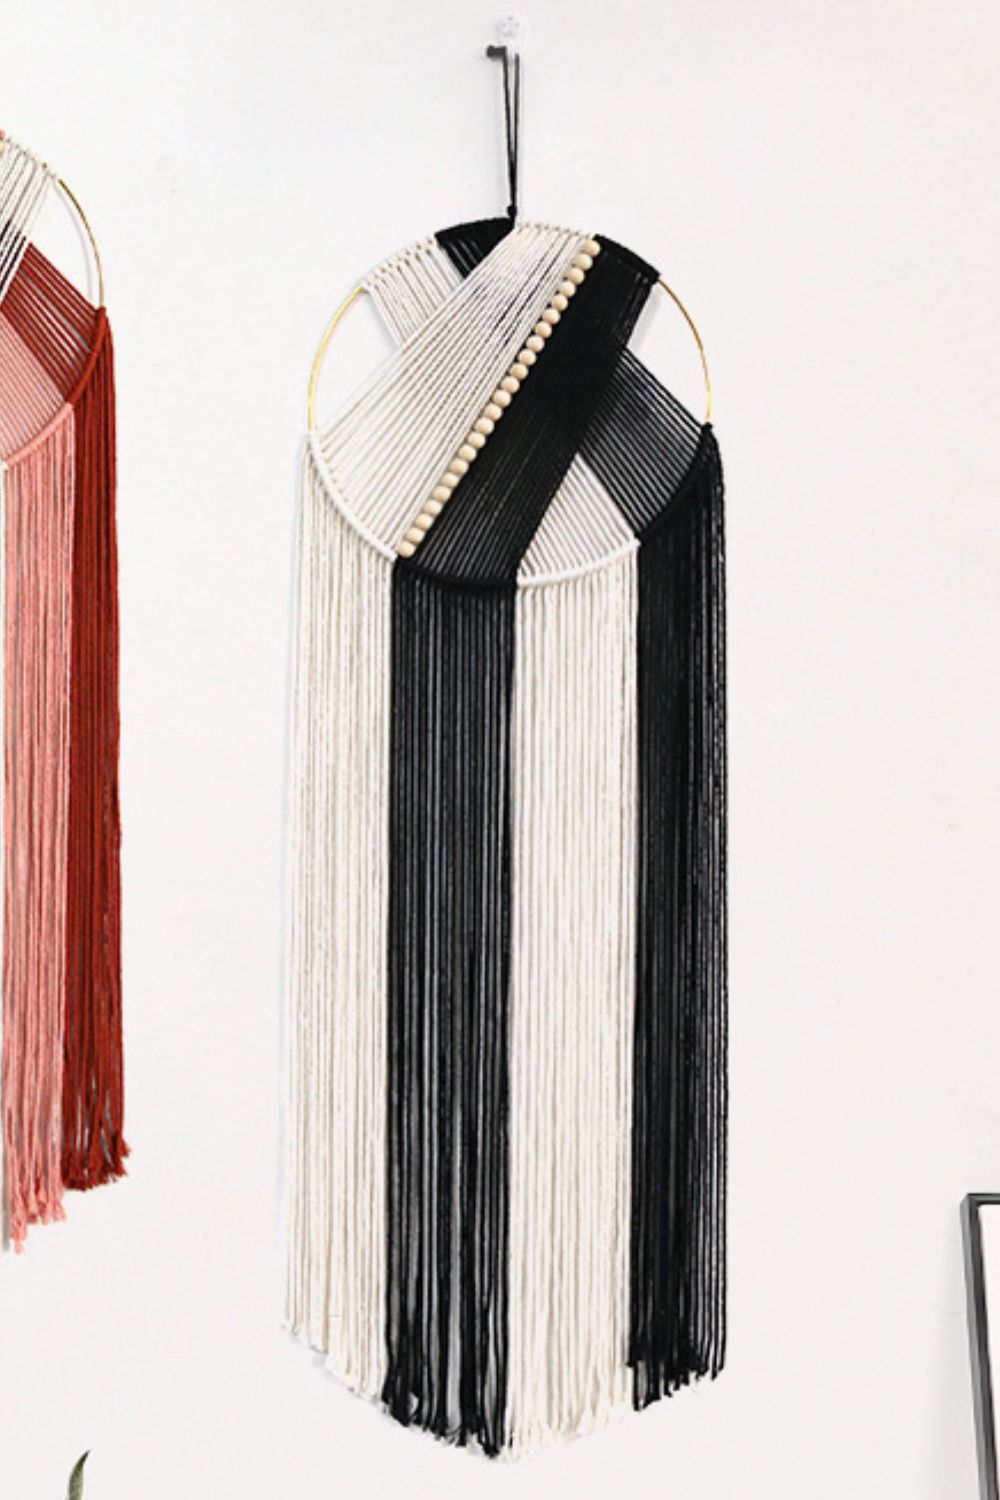 Contrast Macrame Hoop Wall Hanging available in 3 color options